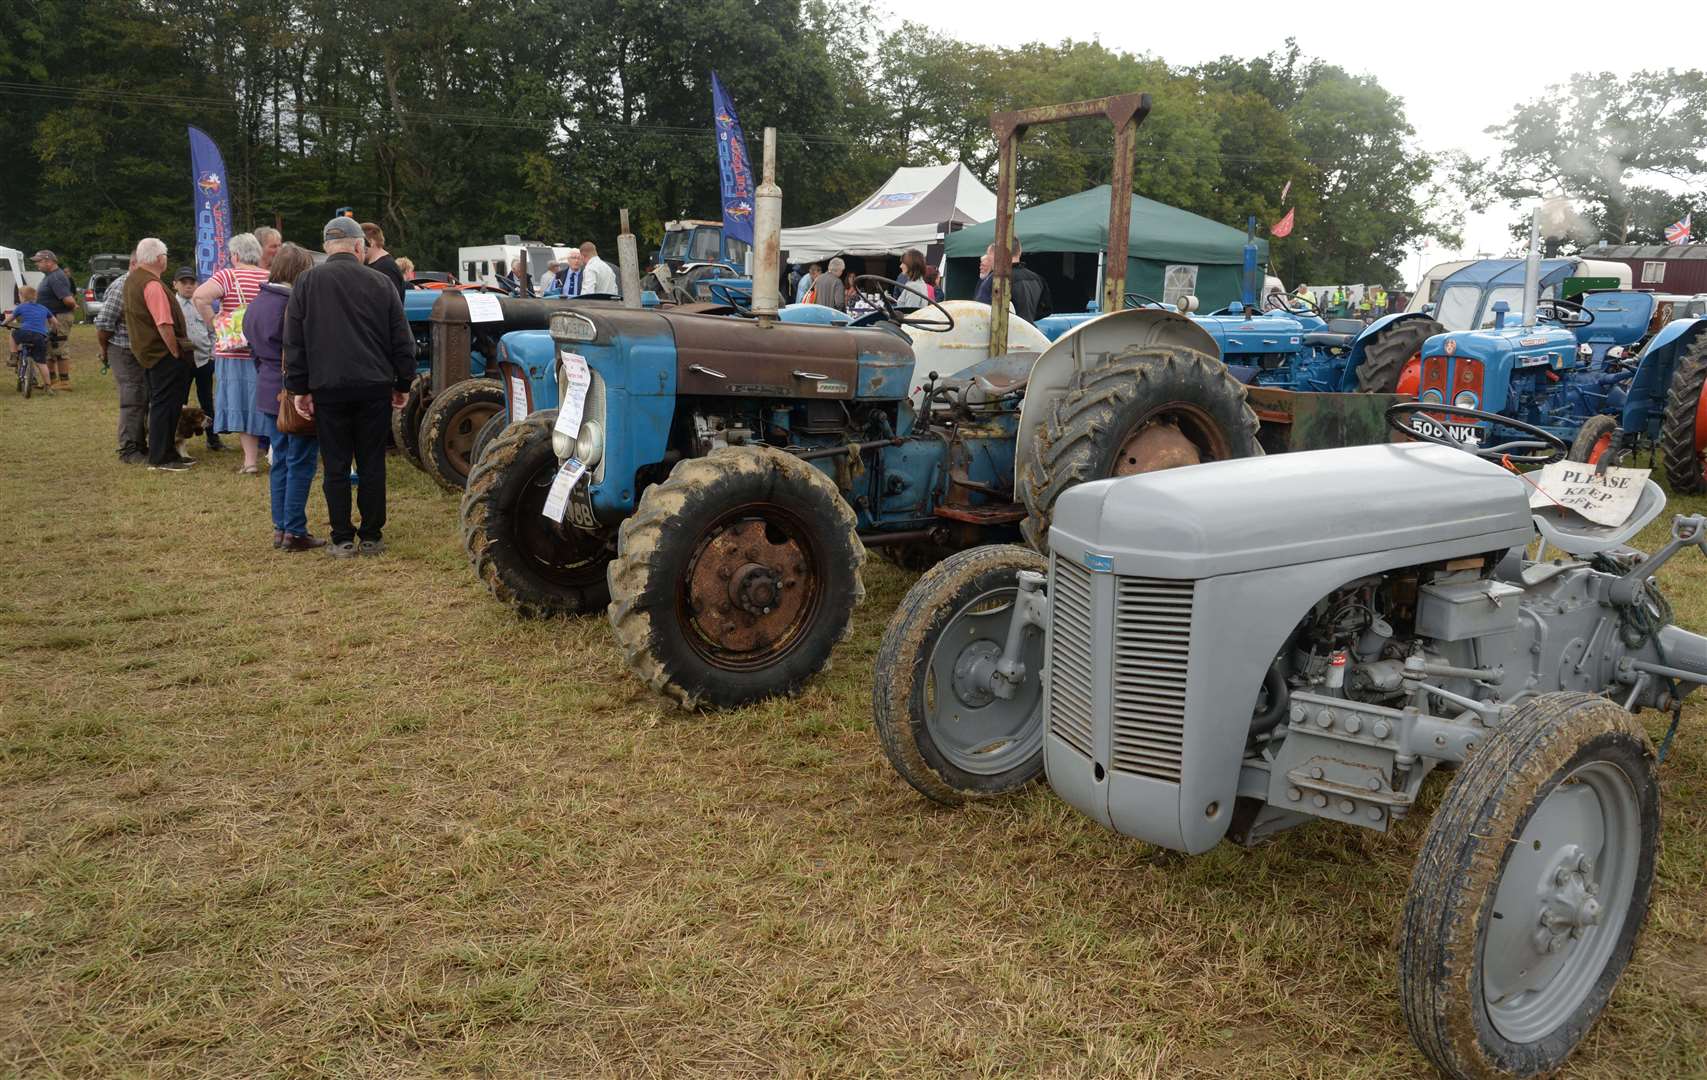 The annual Biddenden Tractorfest will return with vintage and classic tractors. Picture: Chris Davey.